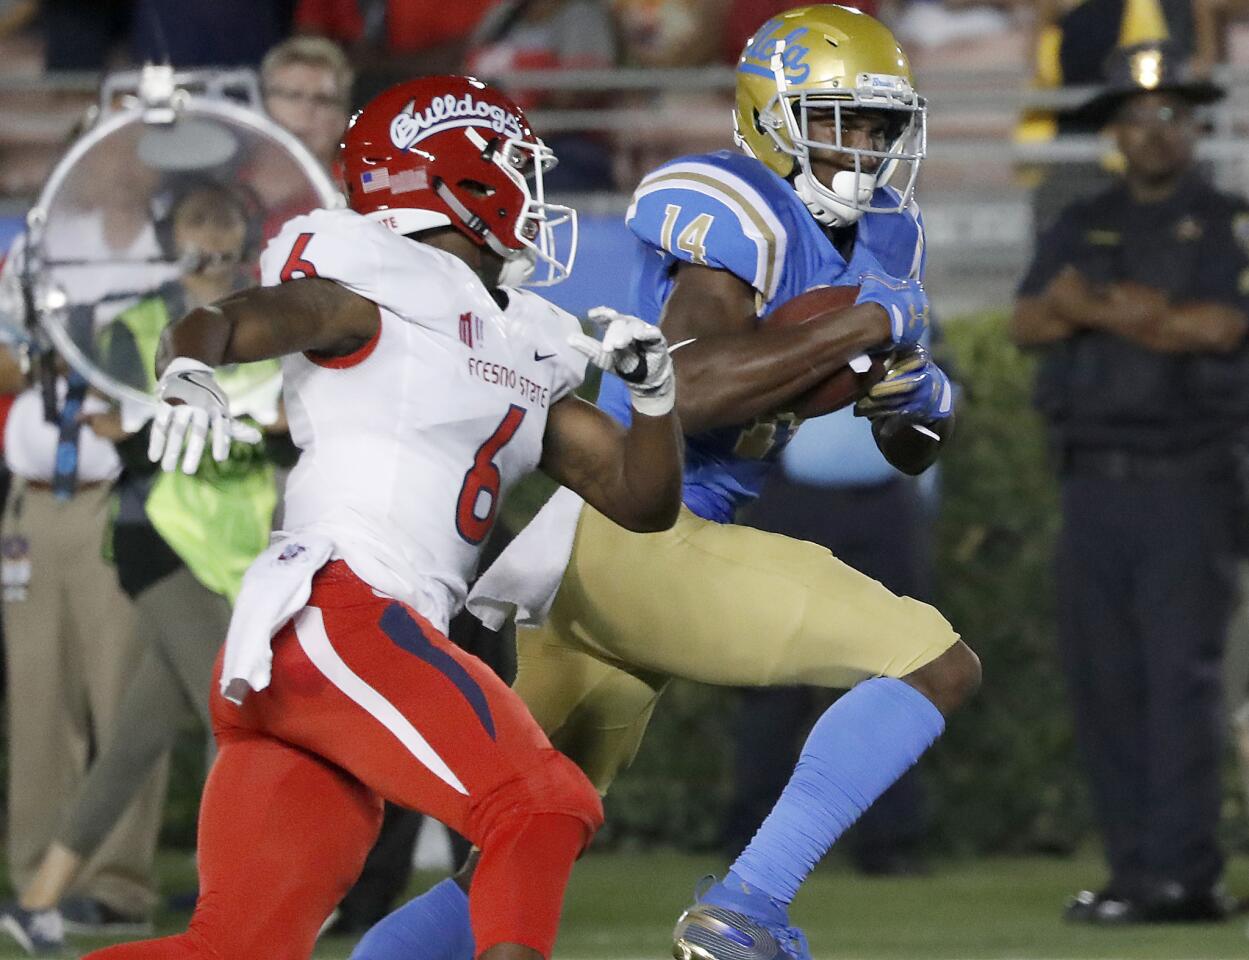 UCLA wide receiver Theo Howard breaks away for a touchdown after making catch in front of Fresno State defensive back Tank Kelly in the second quarter on Saturday.